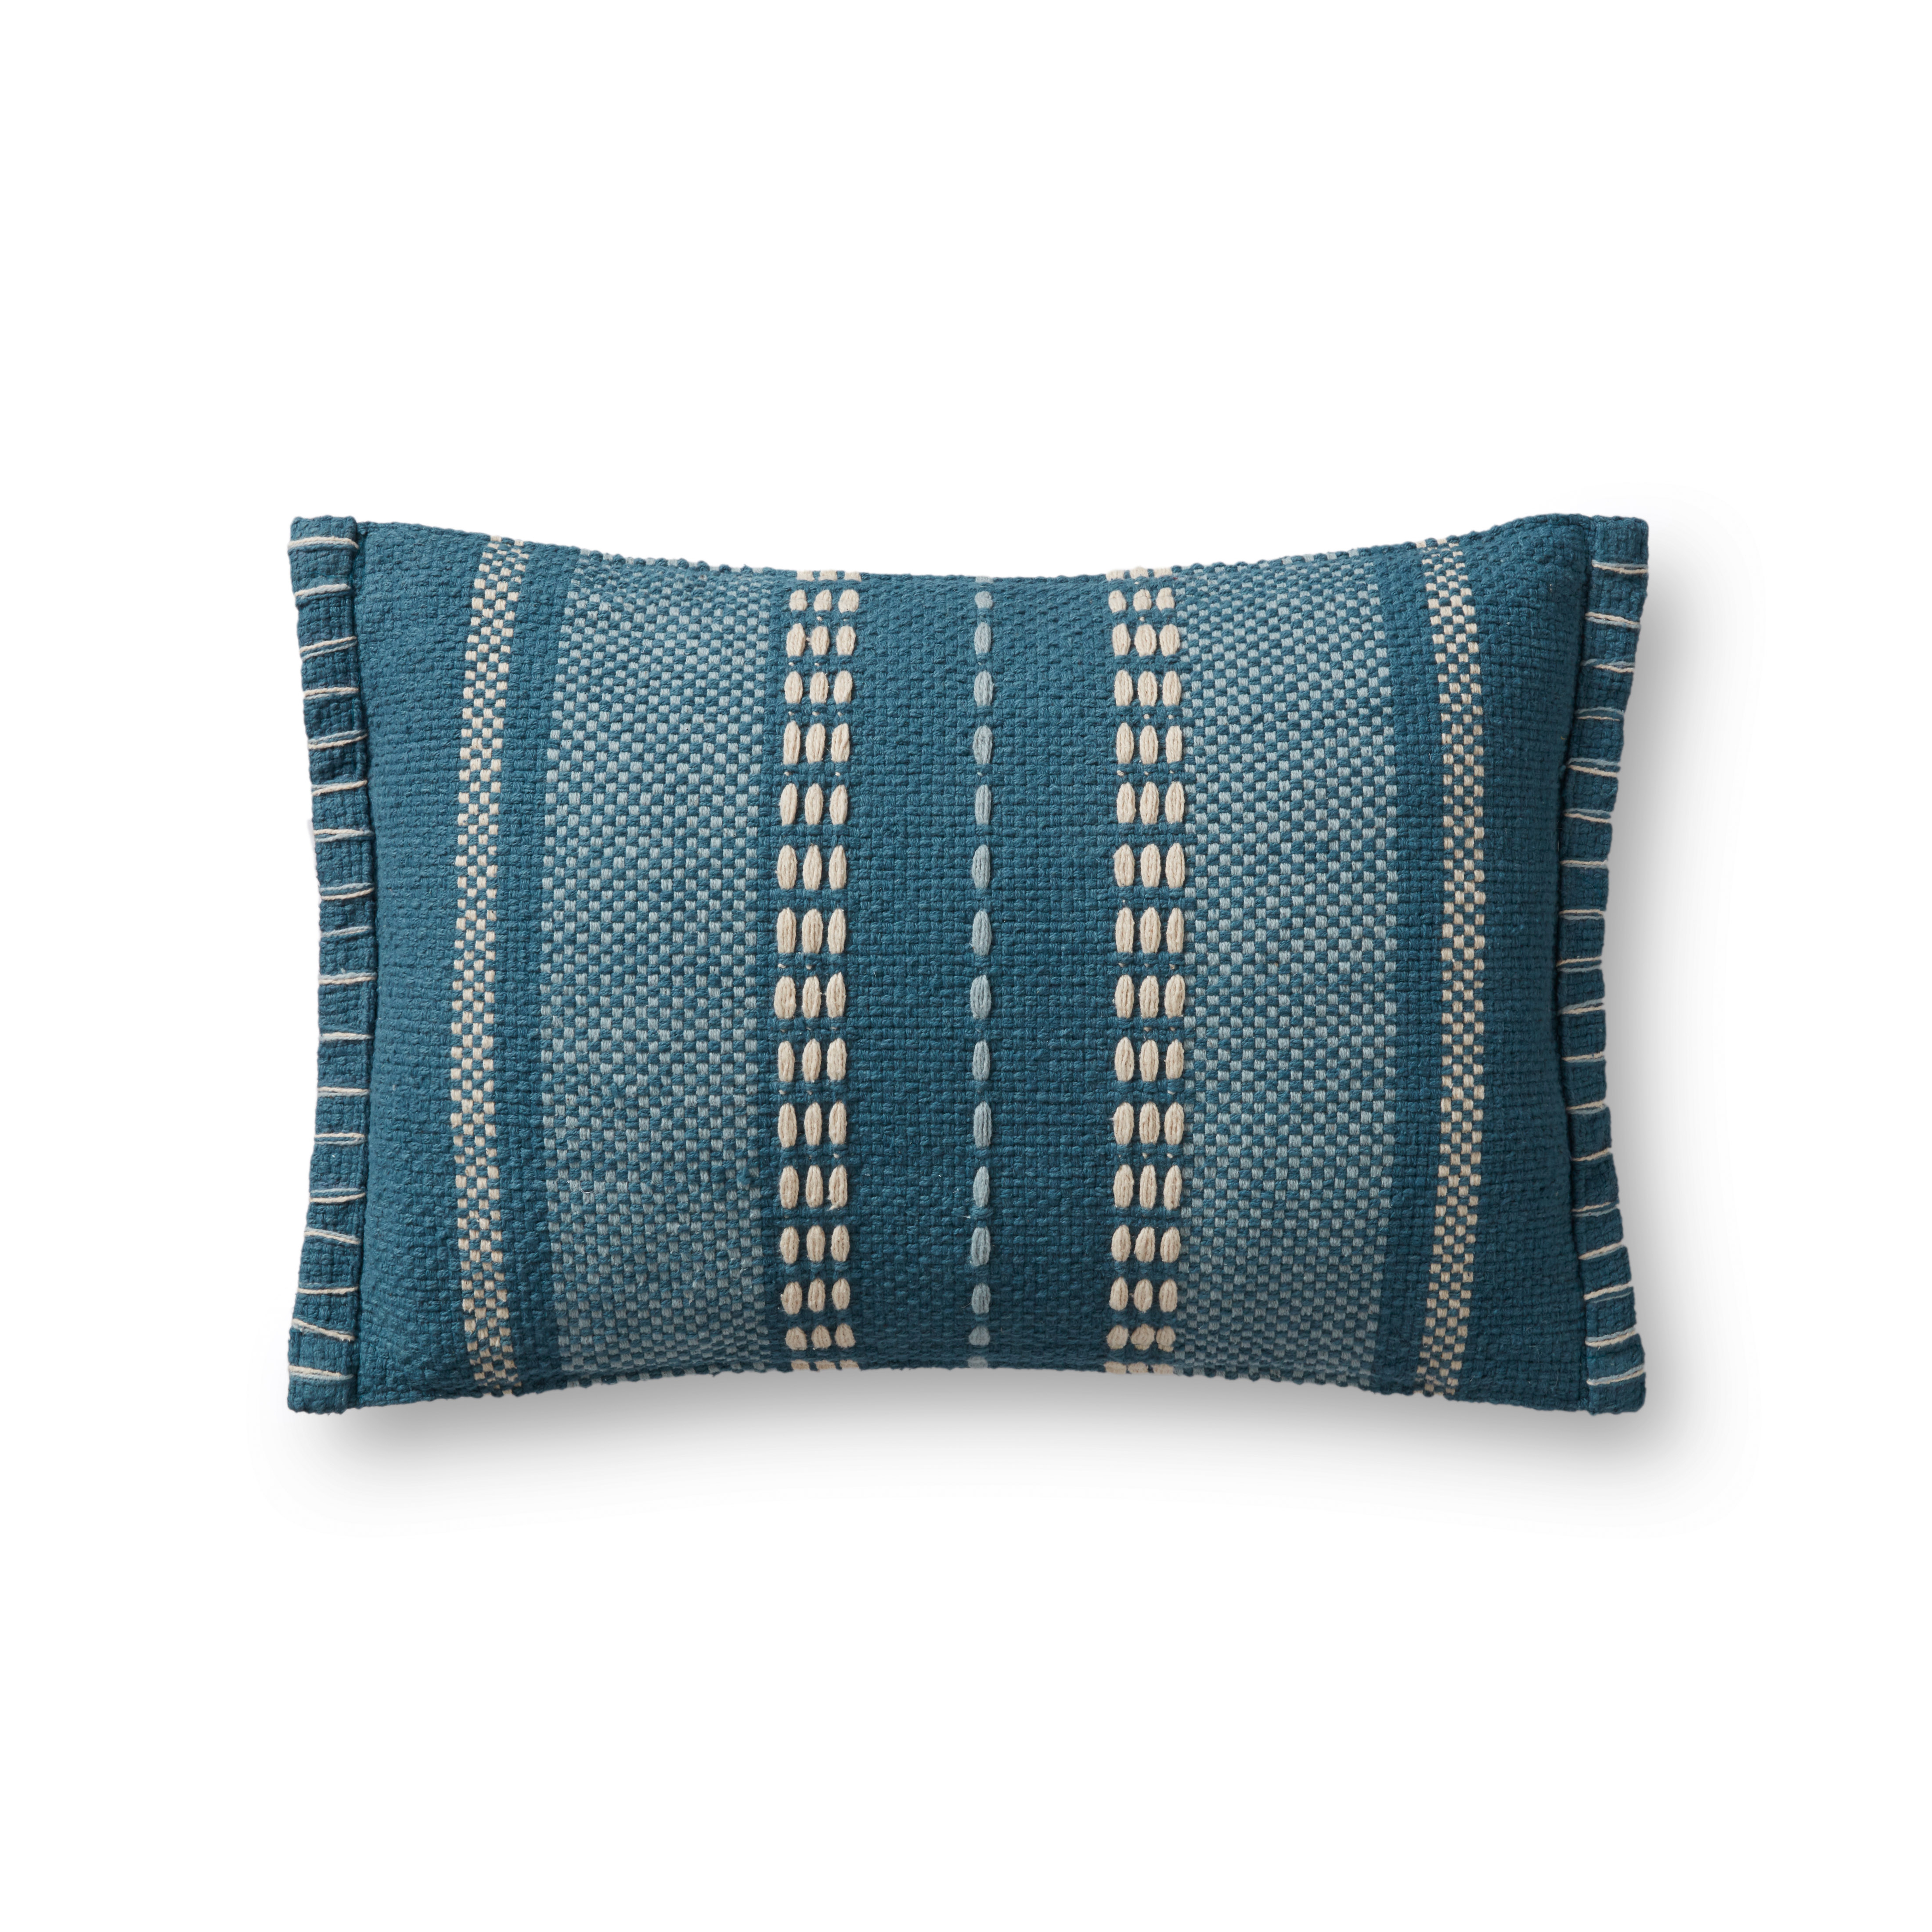 Basketweave Stitched Throw Pillow, Blue, 21" x 13" - Magnolia Home by Joana Gaines Crafted by Loloi Rugs